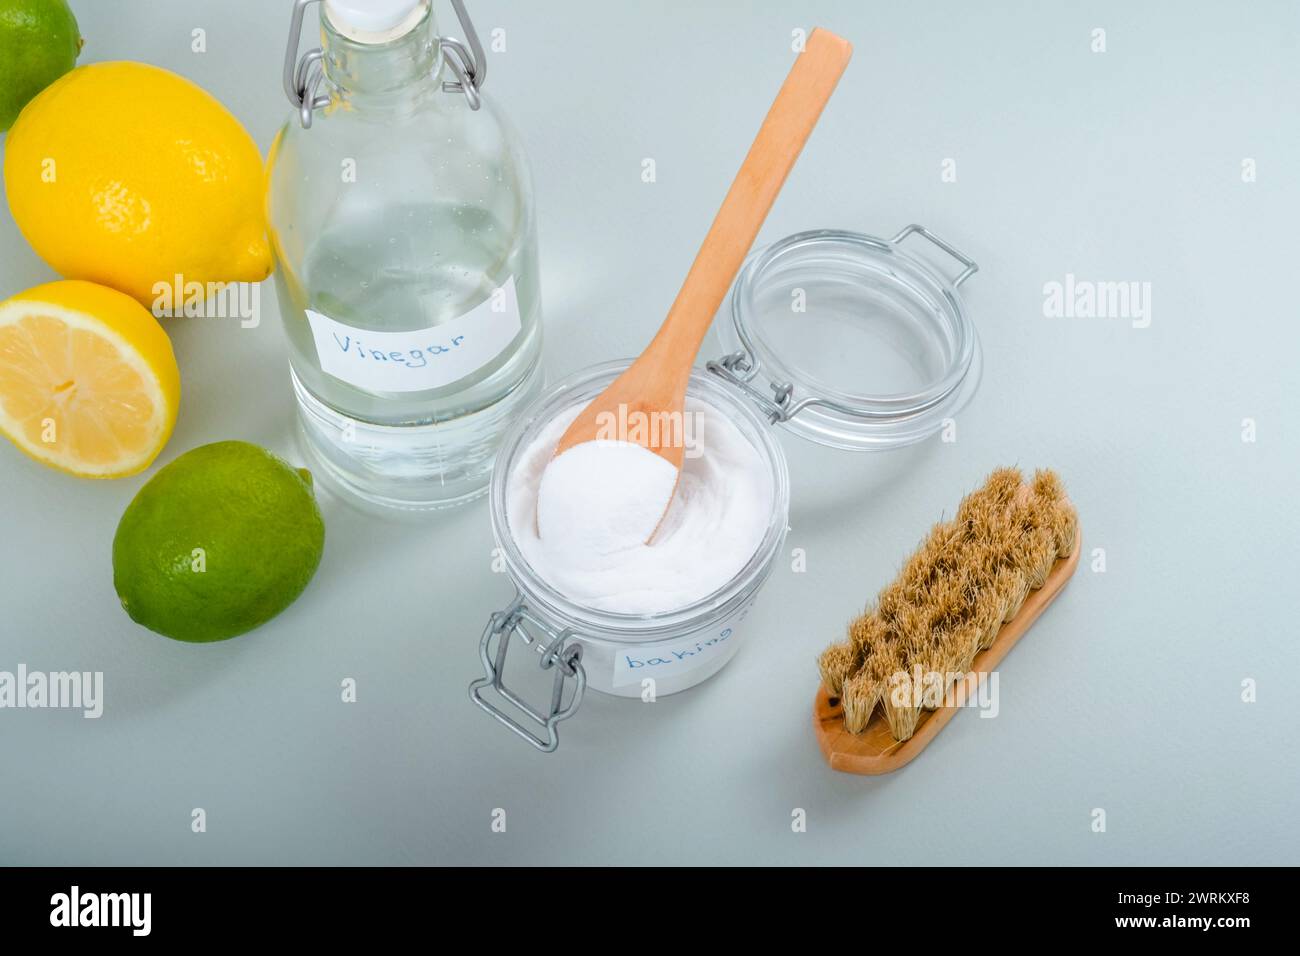 Natural household cleaning products baking soda, white vinegar, citrus fruit, brush on a gray background. Eco-conscious and environmentally friendly Stock Photo